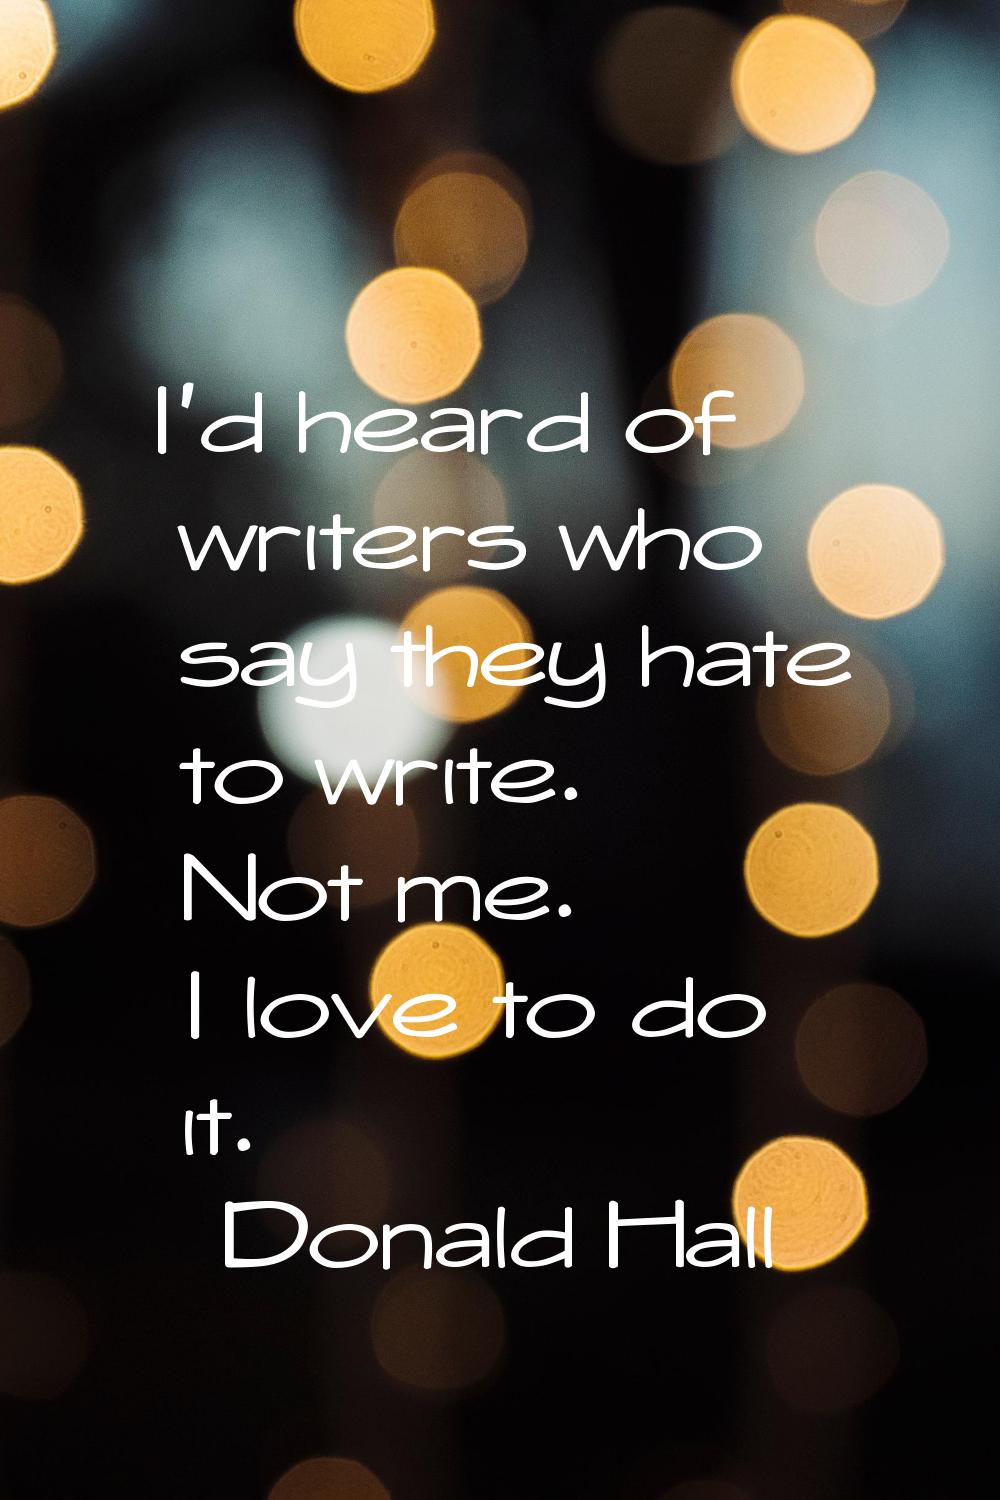 I'd heard of writers who say they hate to write. Not me. I love to do it.